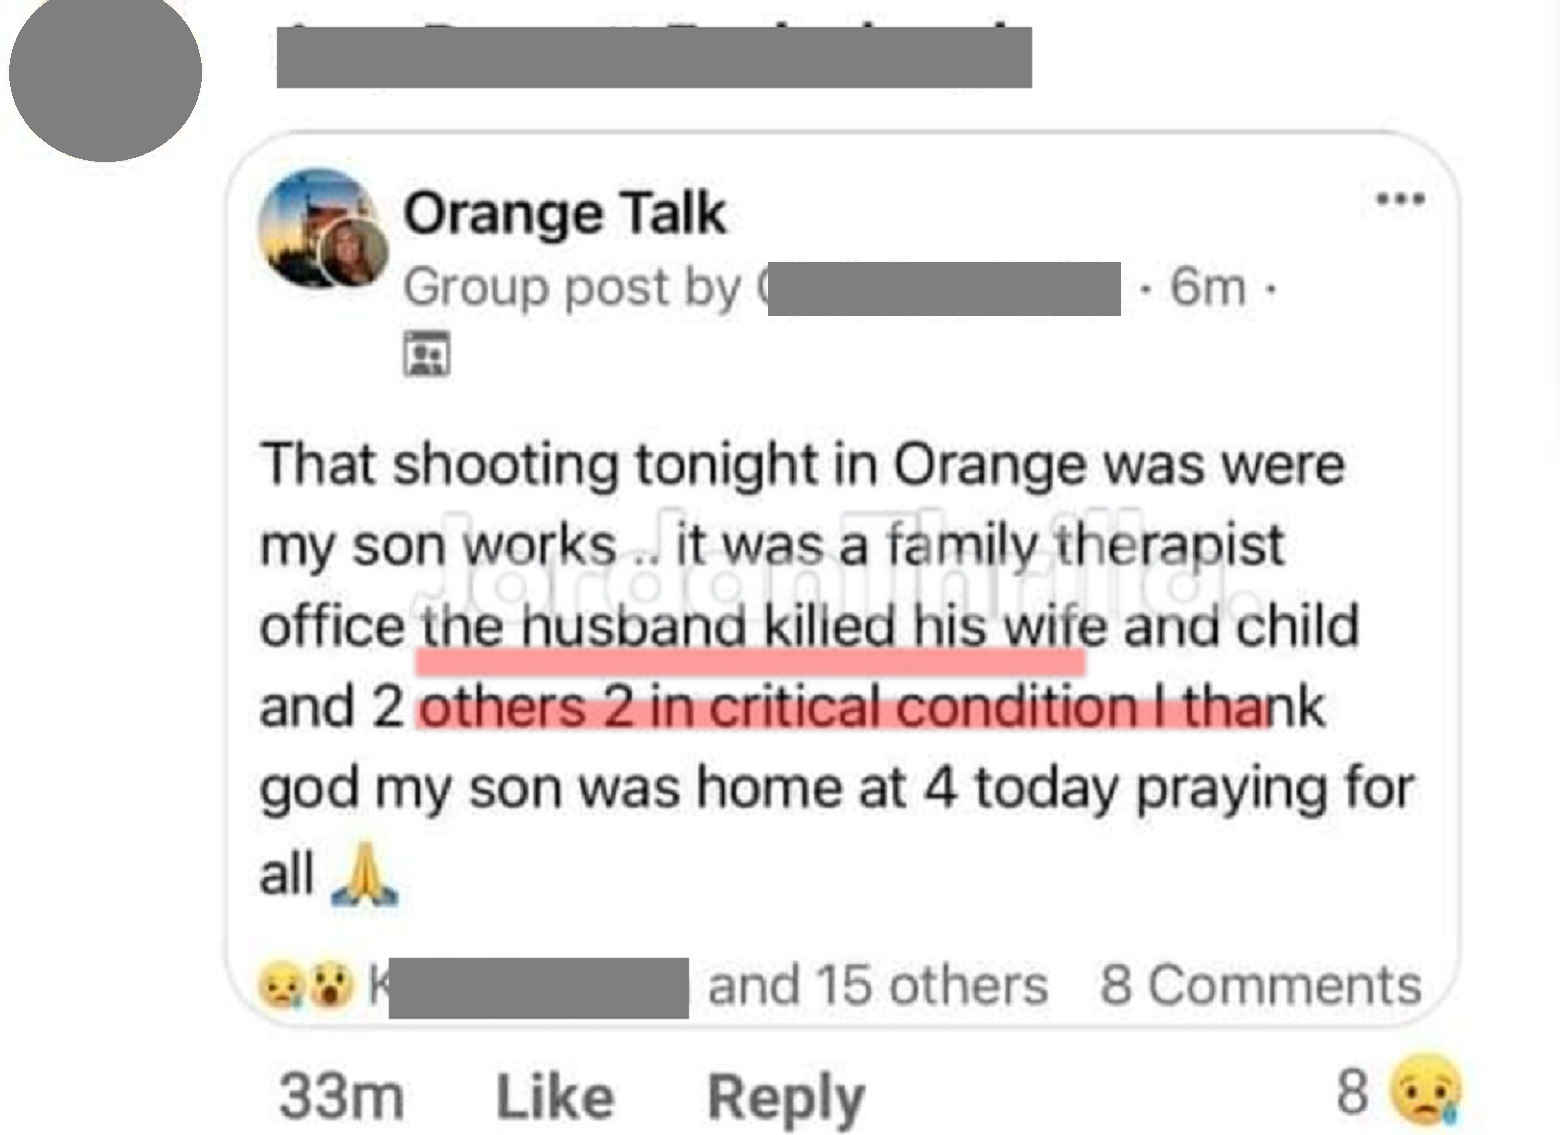 Video Aftermath of Orange California Mass Shooting Where a Husband Killed His Wife and Child at Family Therapist Office is Tragic